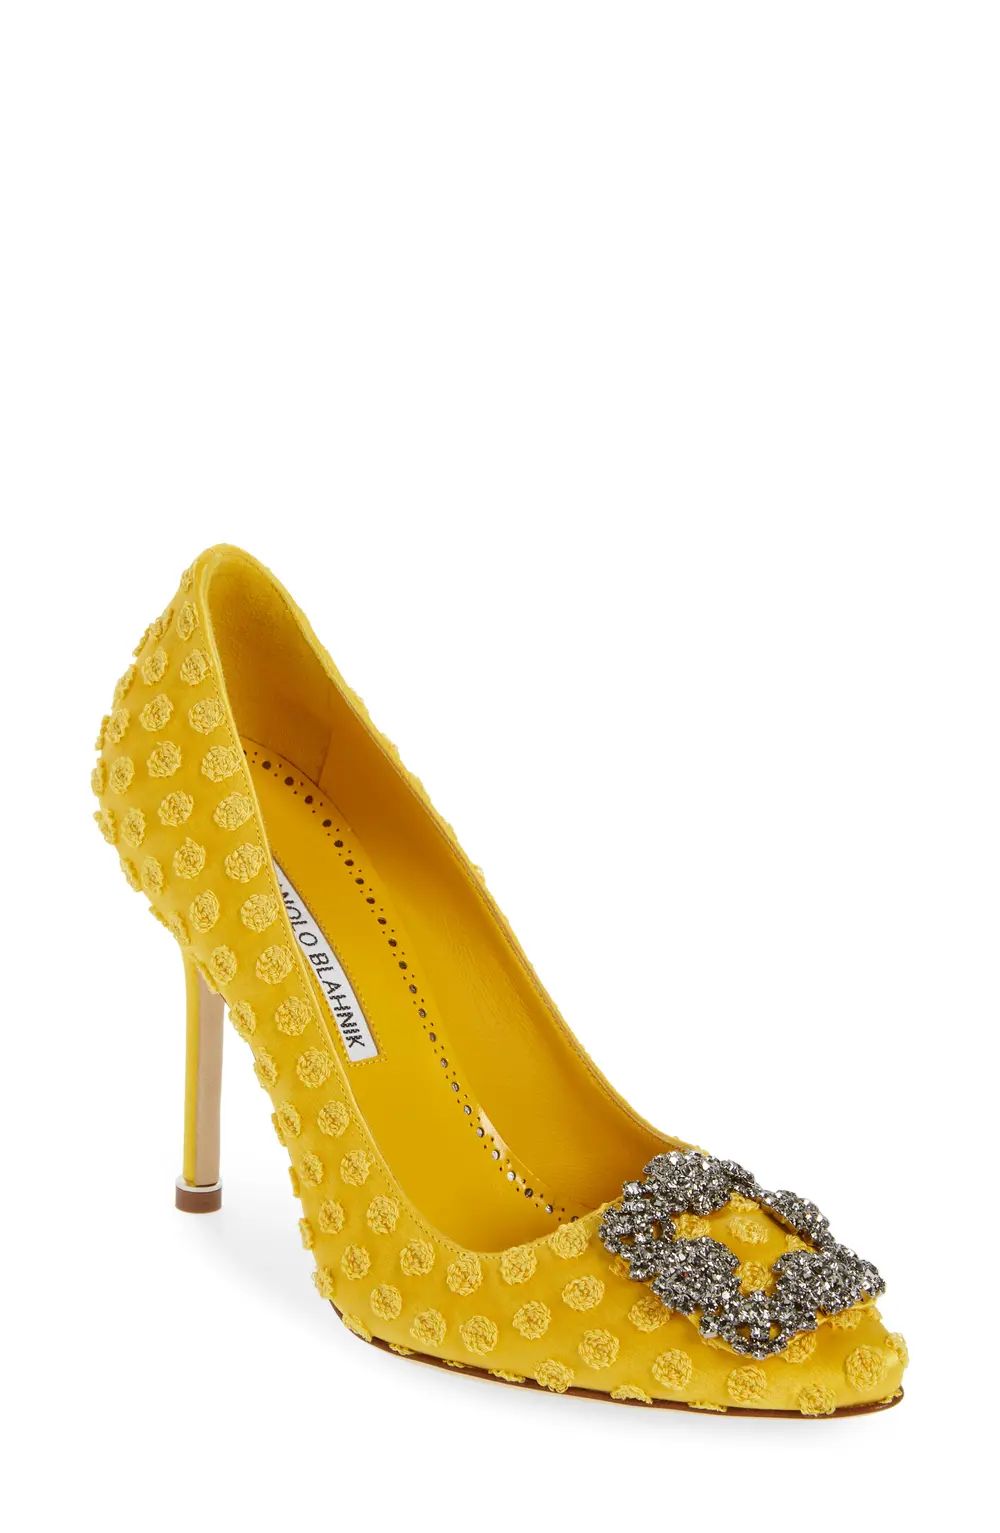 Manolo Blahnik Hangisi Pointed Toe Pump, Size 5Us / 35Eu in Yellow at Nordstrom | Nordstrom Canada